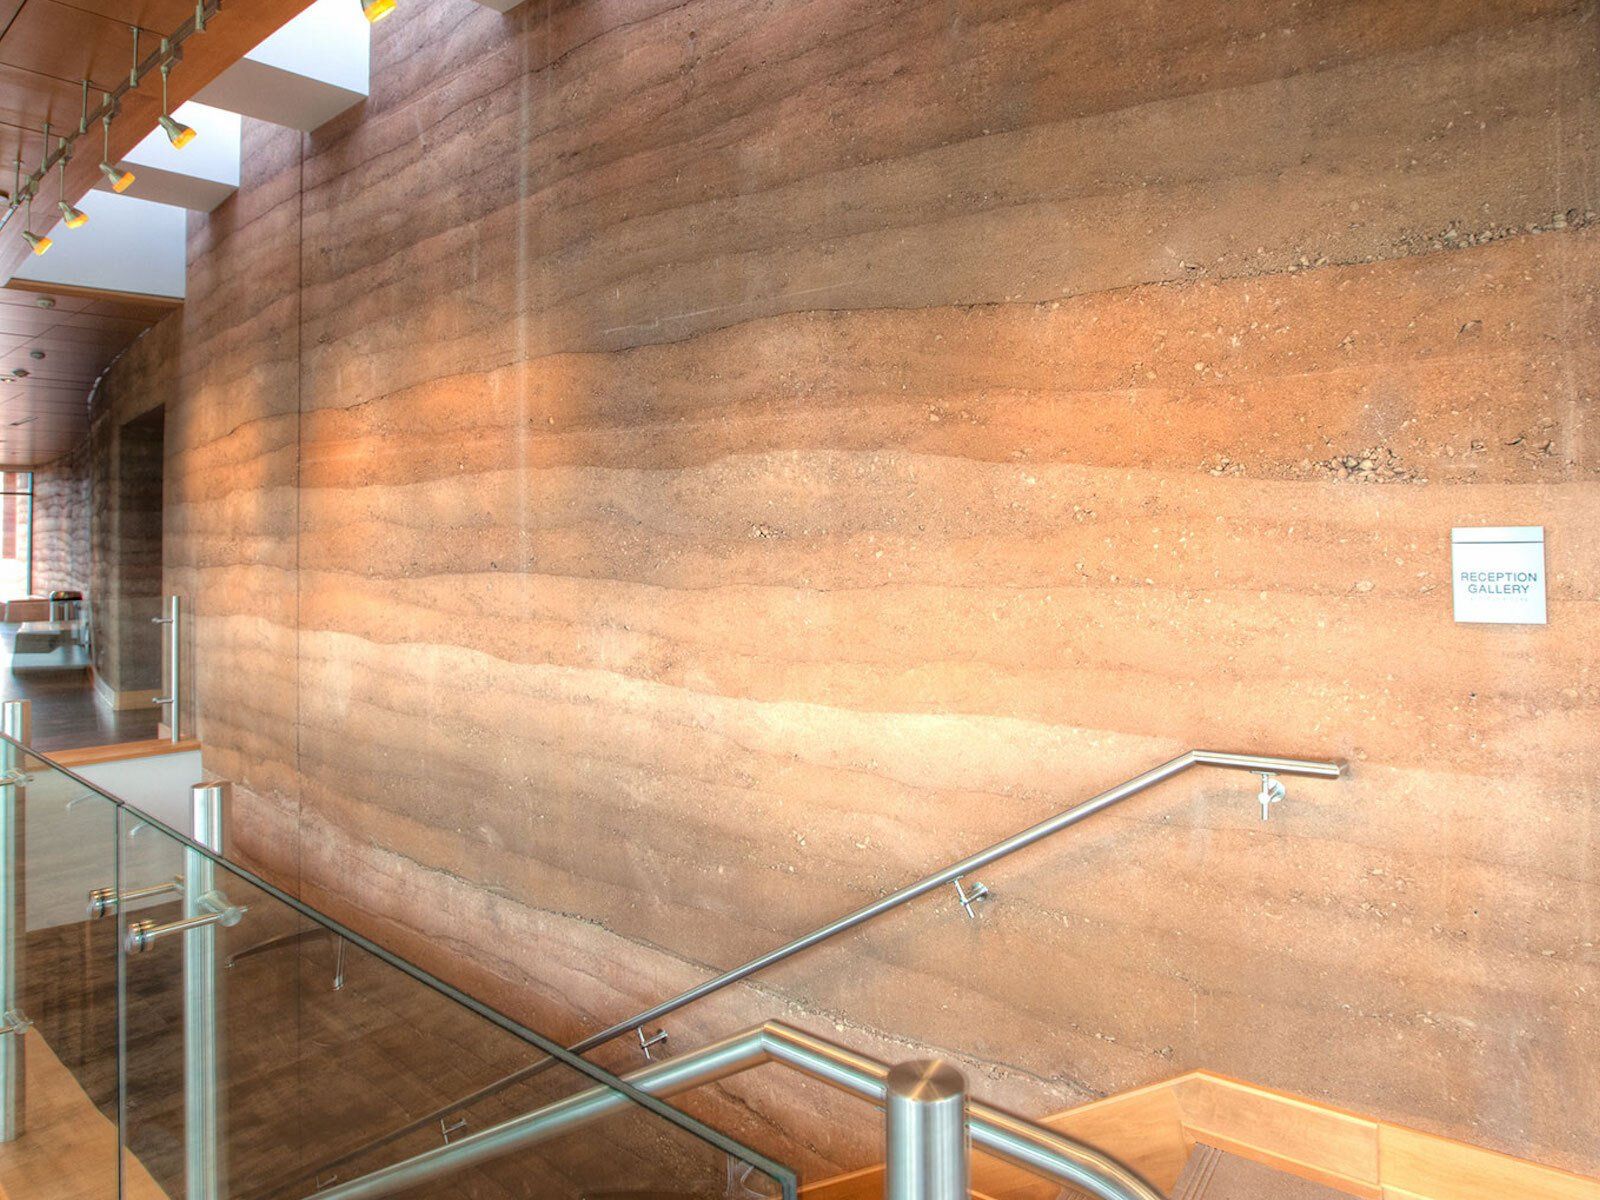 Brinton Museum interior stairway with large rammed earth SIREWALL